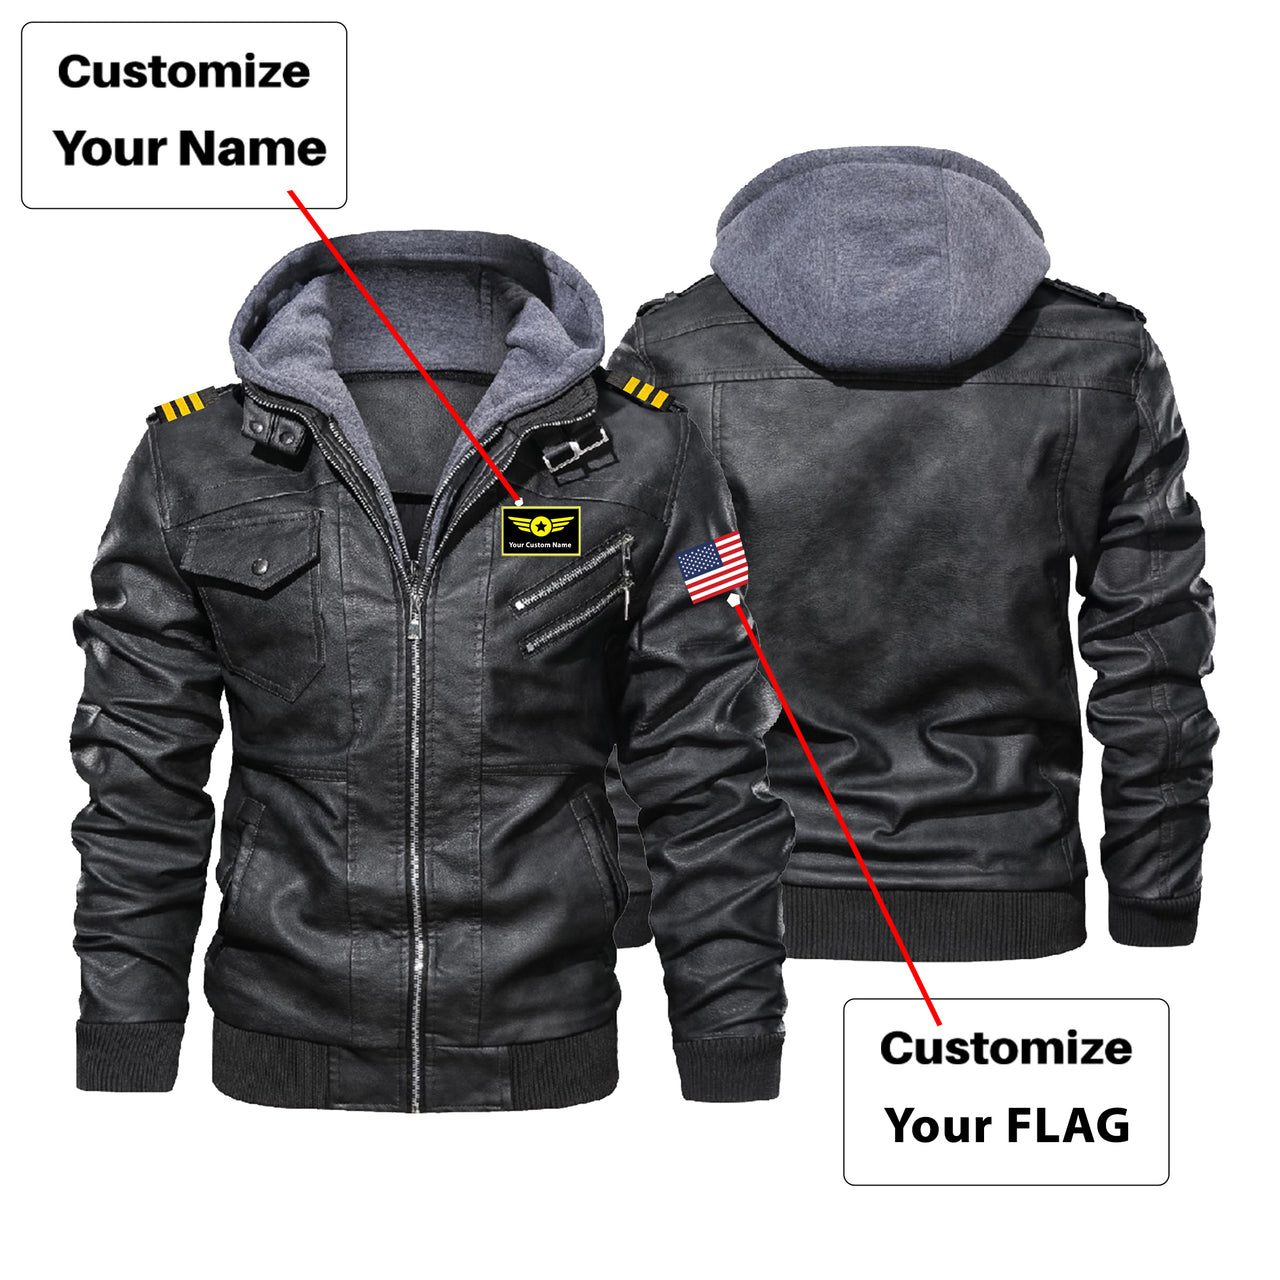 Custom Flag & Name with EPAULETTES "Special Badge" Designed Hooded Leather Jackets